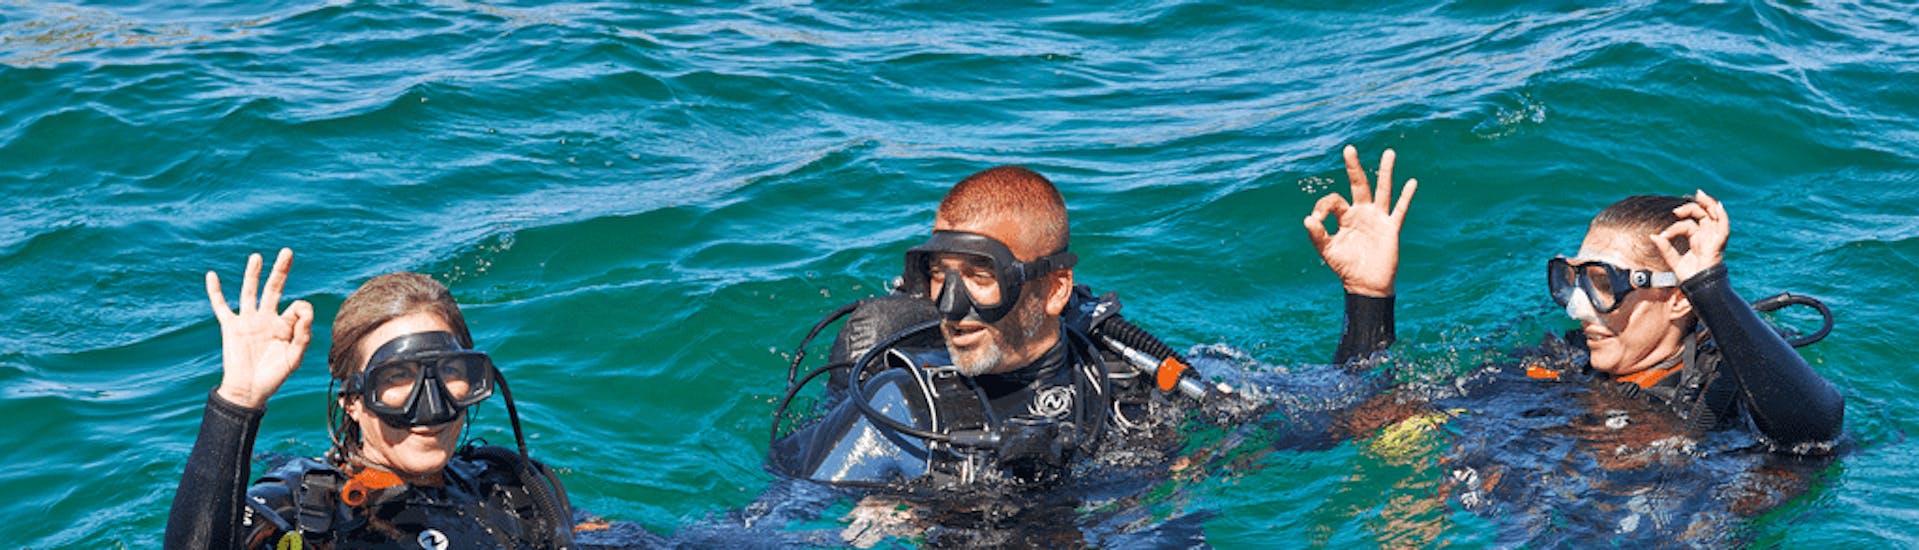 Scuba Diving Course for Beginners - Open Water Diver.